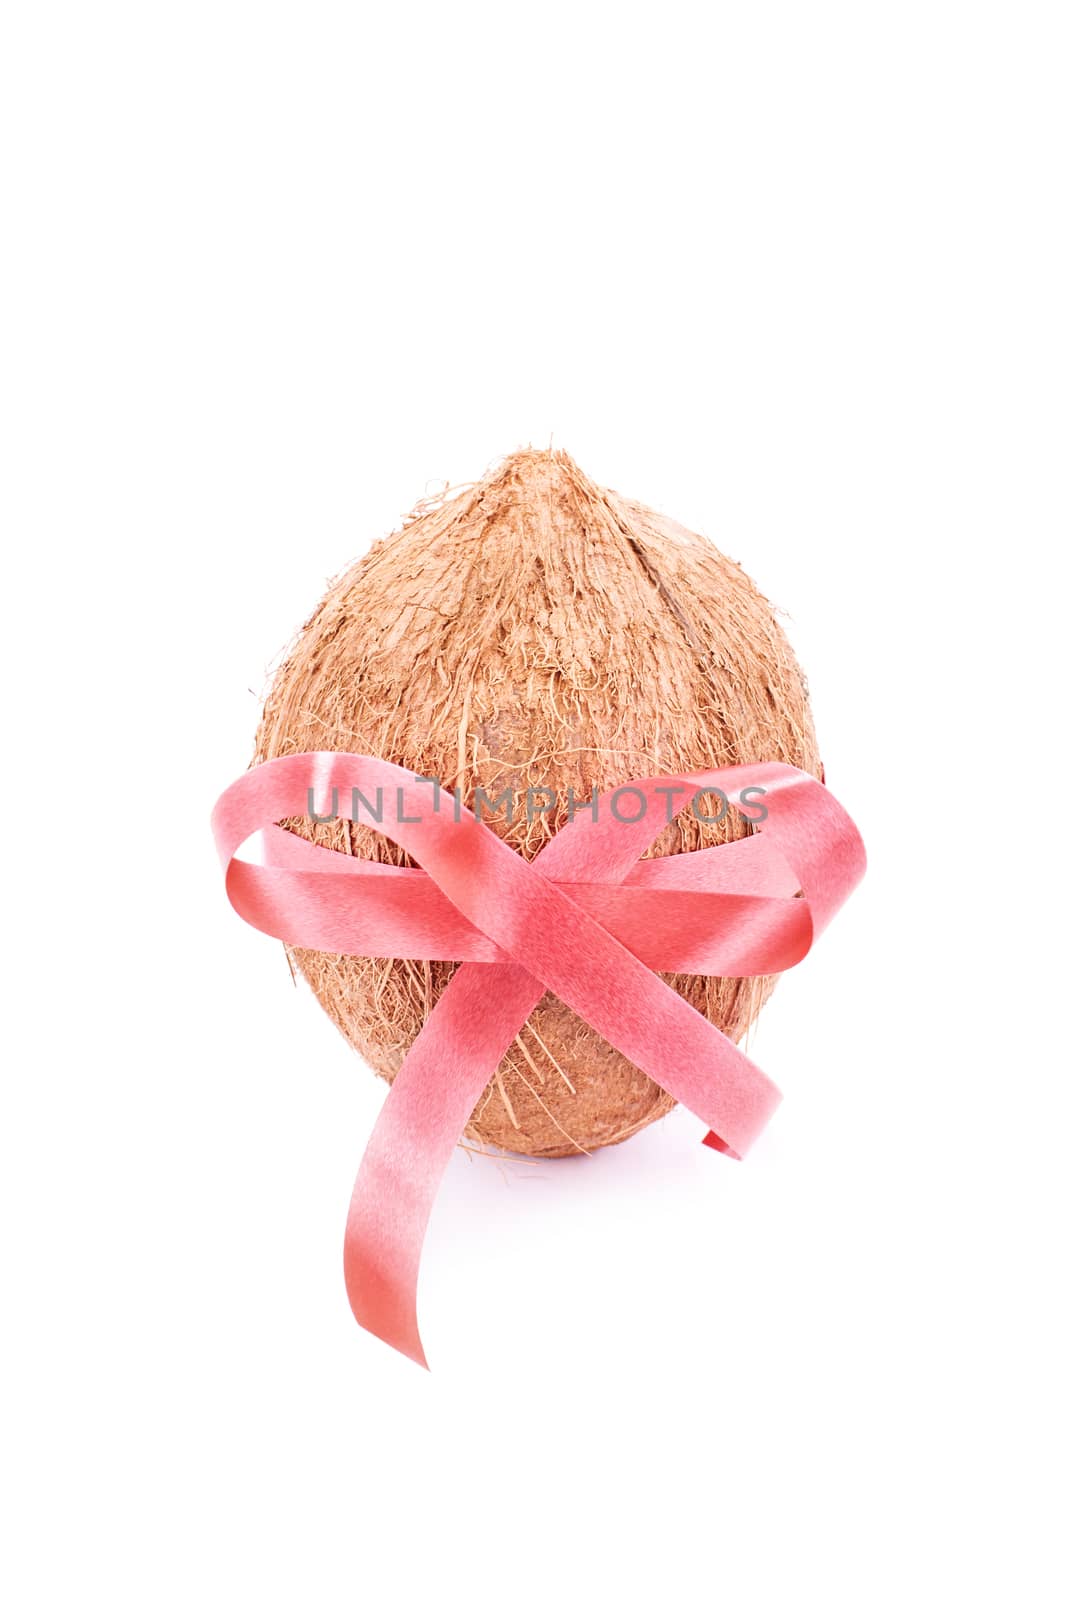 Coconut wrapped with red ribbon, isolated on white background.